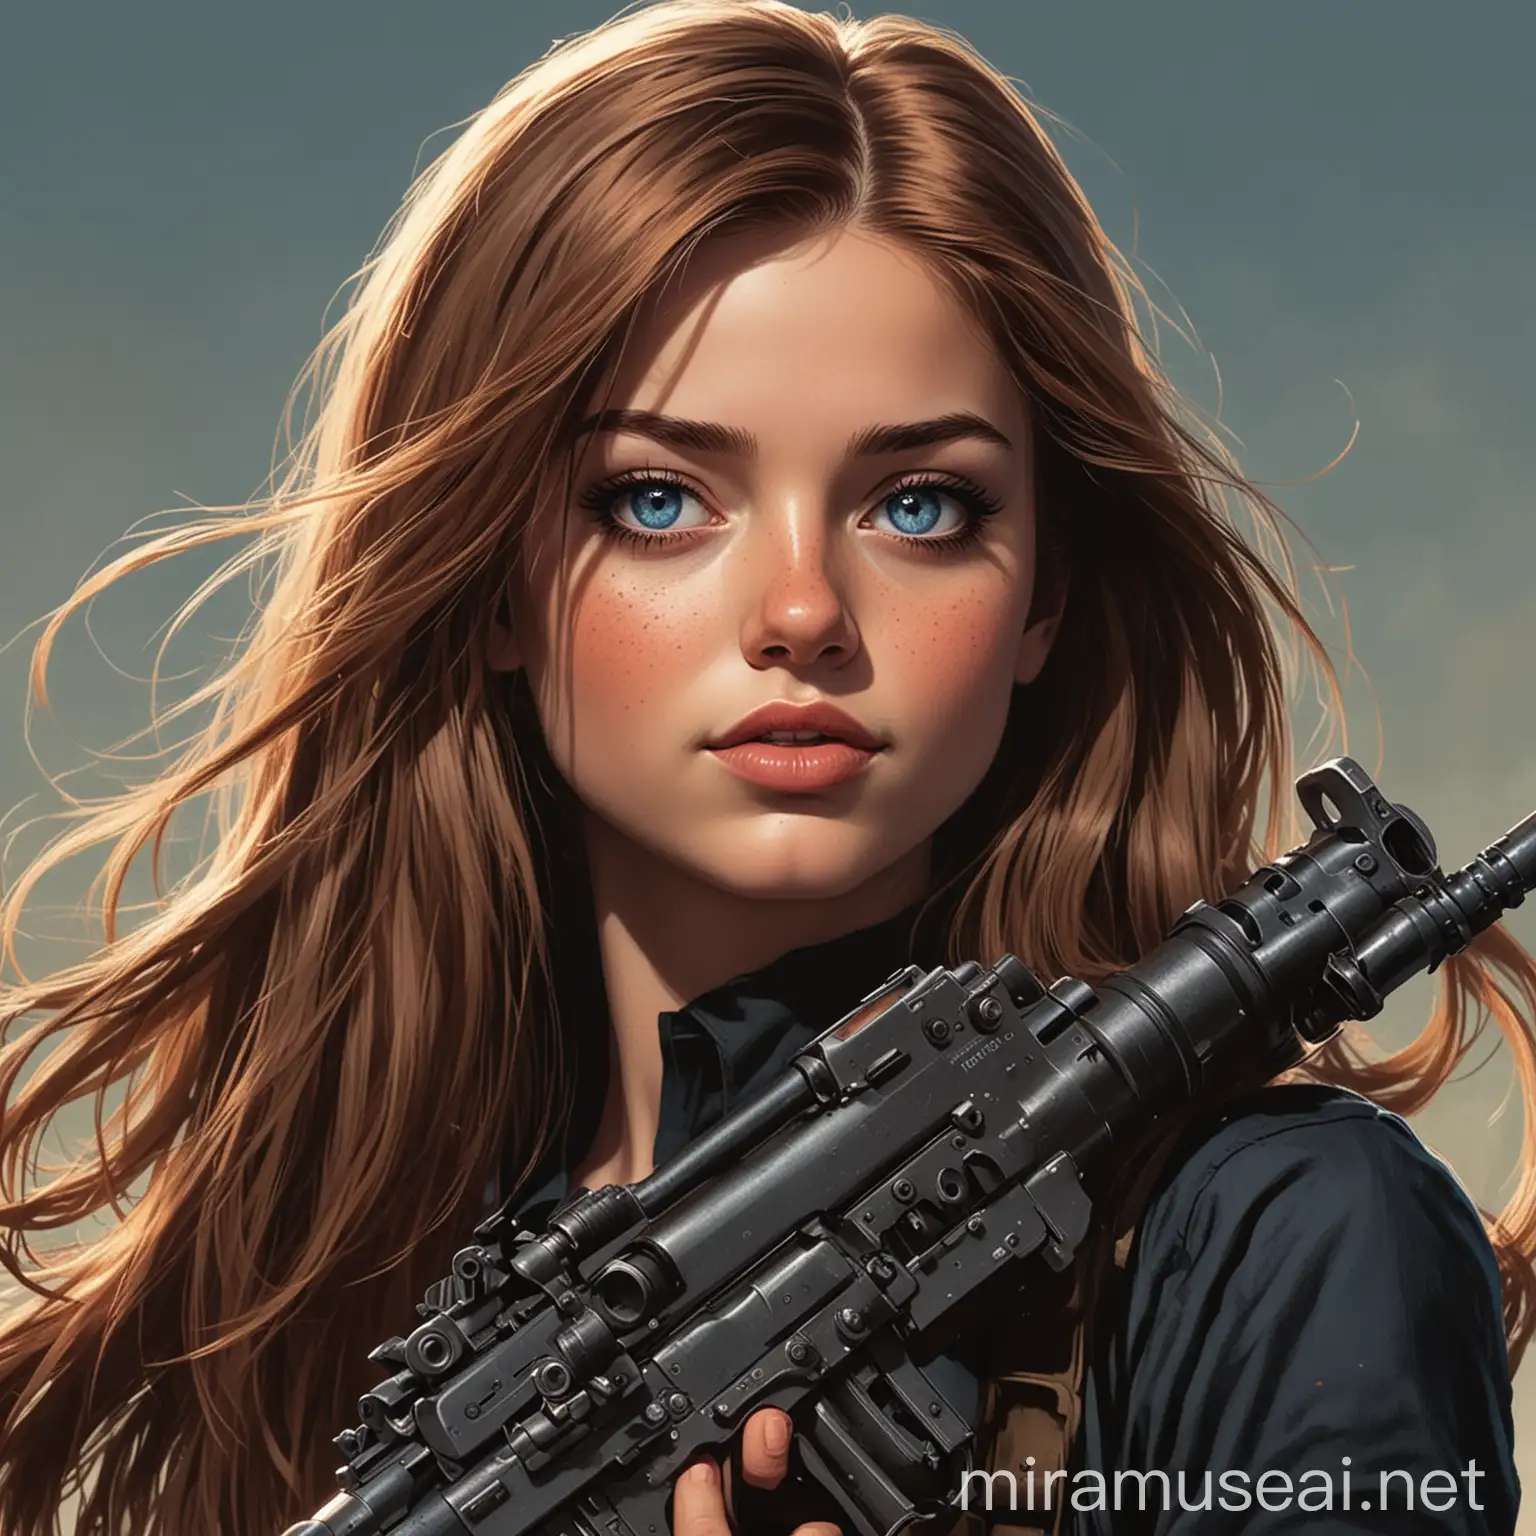 Girl with snub nose, round face, blue eyes, long brown straight hair wearing a black top with a machine gun. Marvel comic book style